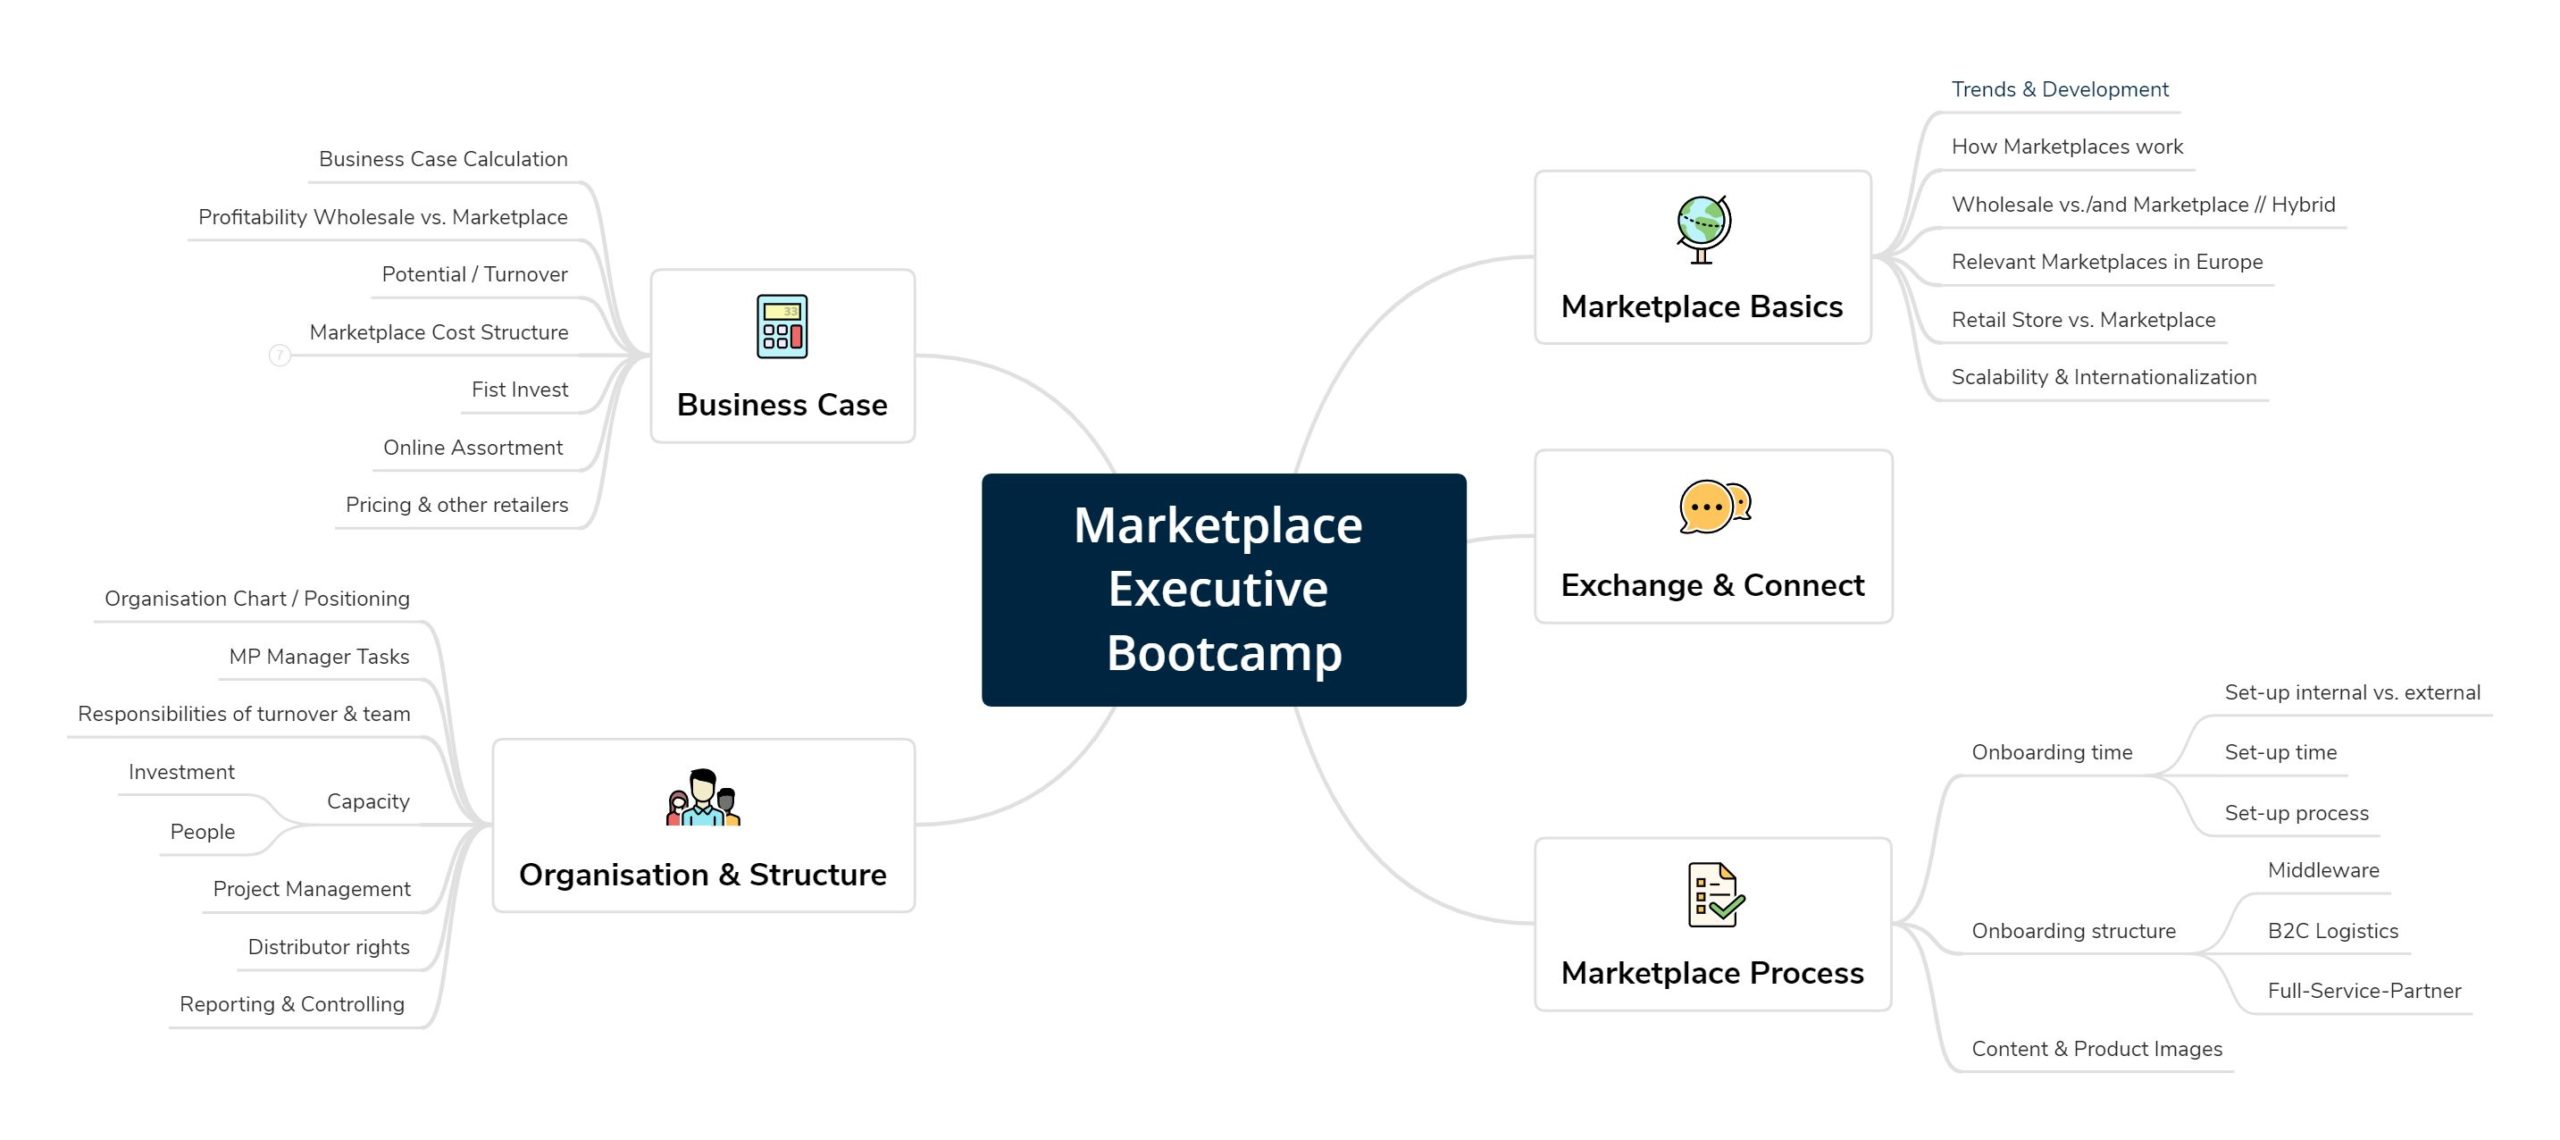 COMPETENCE FIELDS OF THE MARKETPLACE EXECUTIVE BOOTCAMP